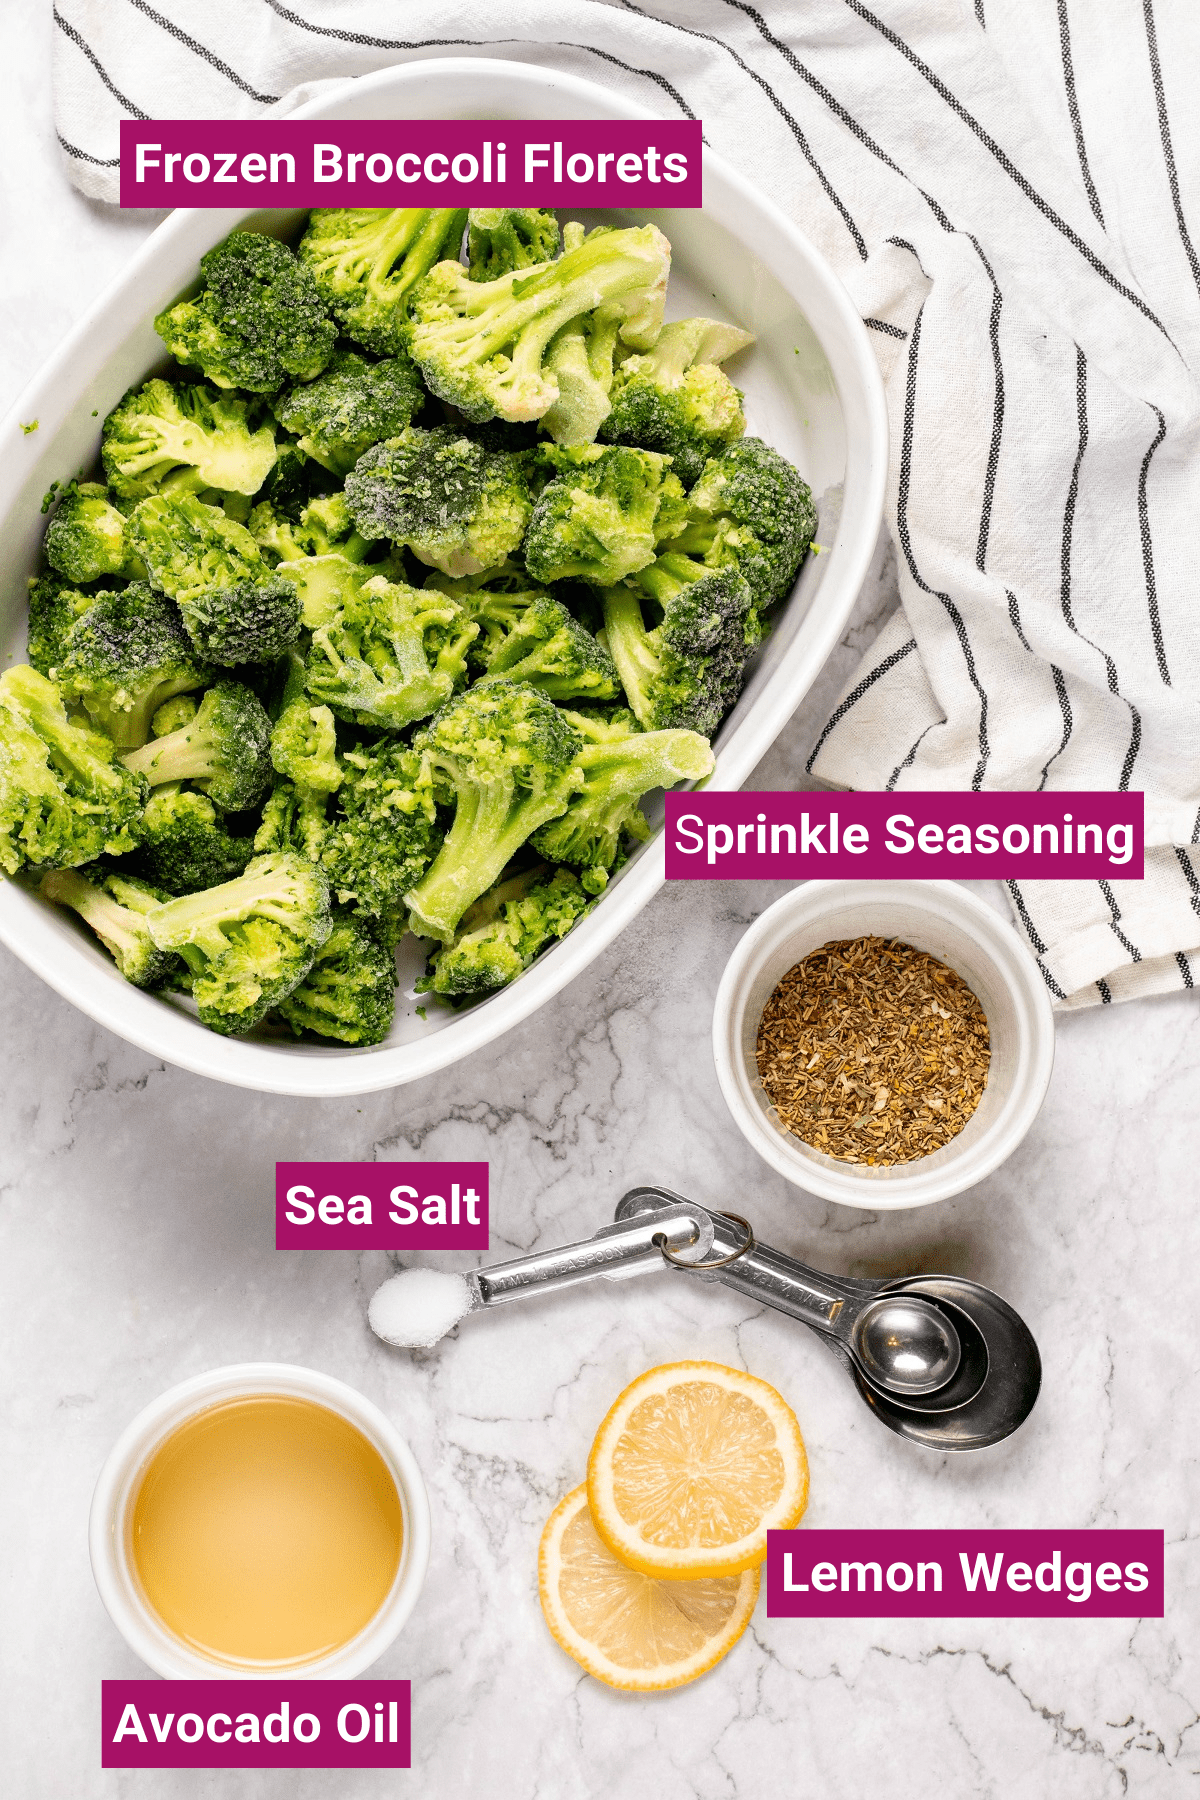 ingredients needed to make air fried frozen broccoli like frozen broccoli florets, herb spices, sea salt, and avocado oil in separate bowls